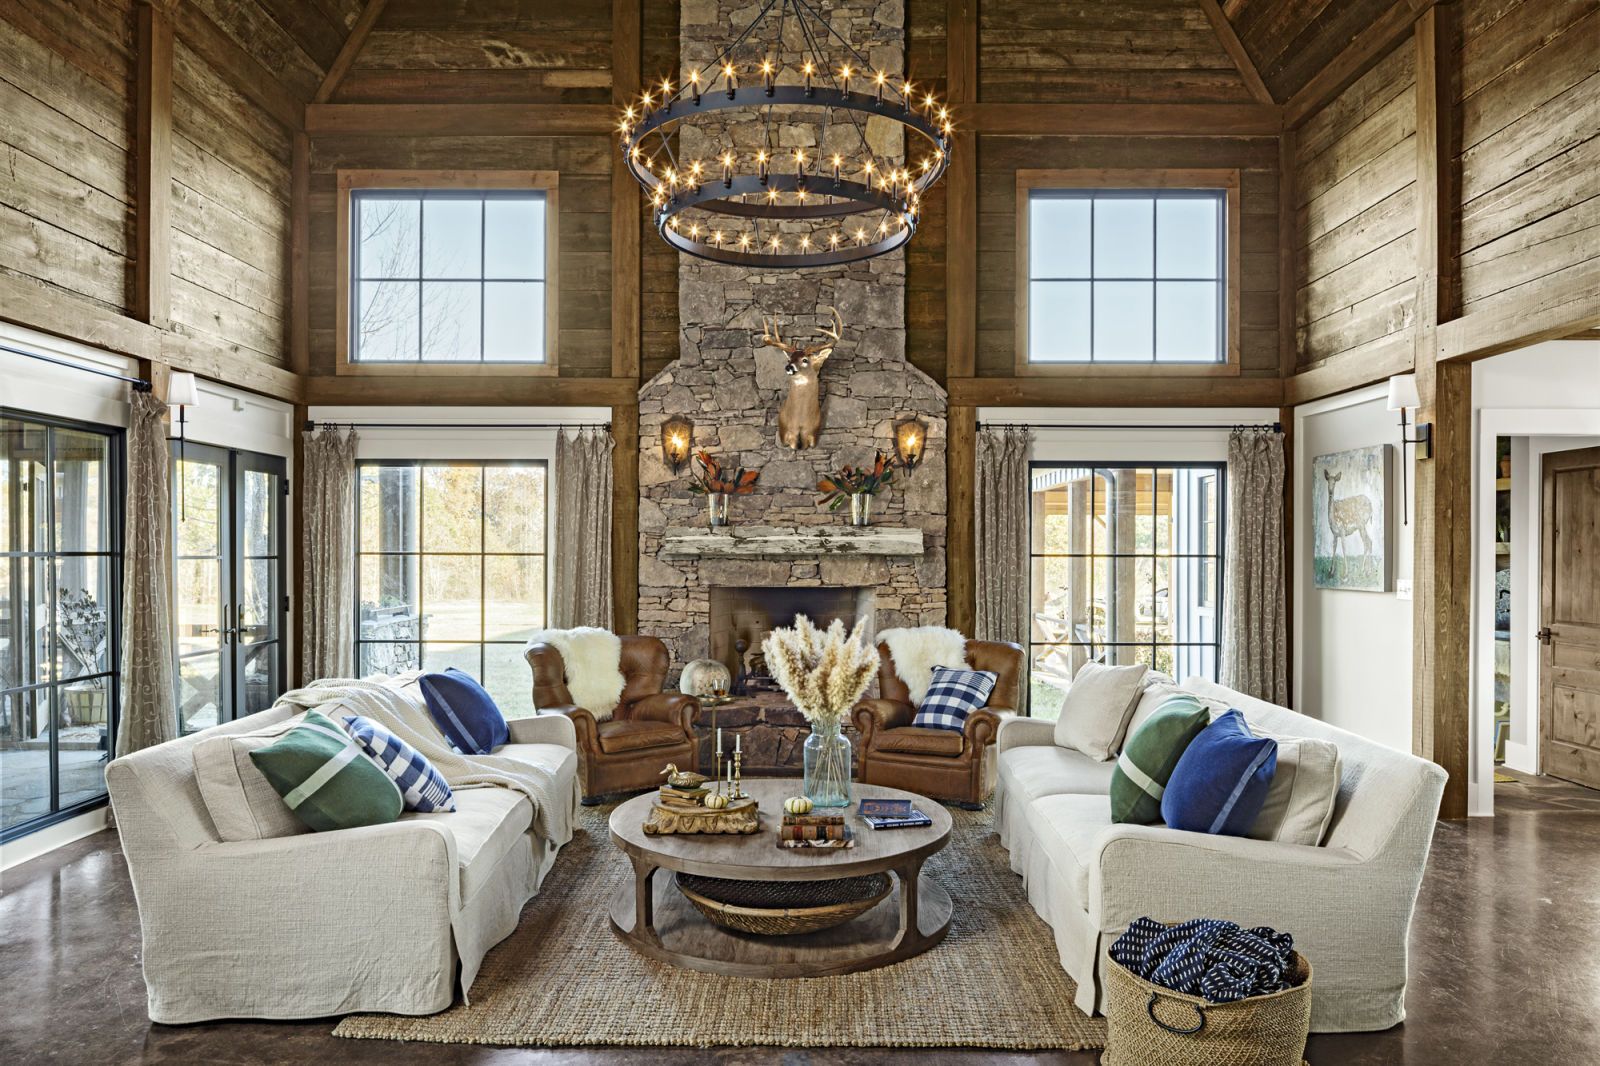 Modern Country Home Interiors: Blending Rustic Charm With Modern Comfort